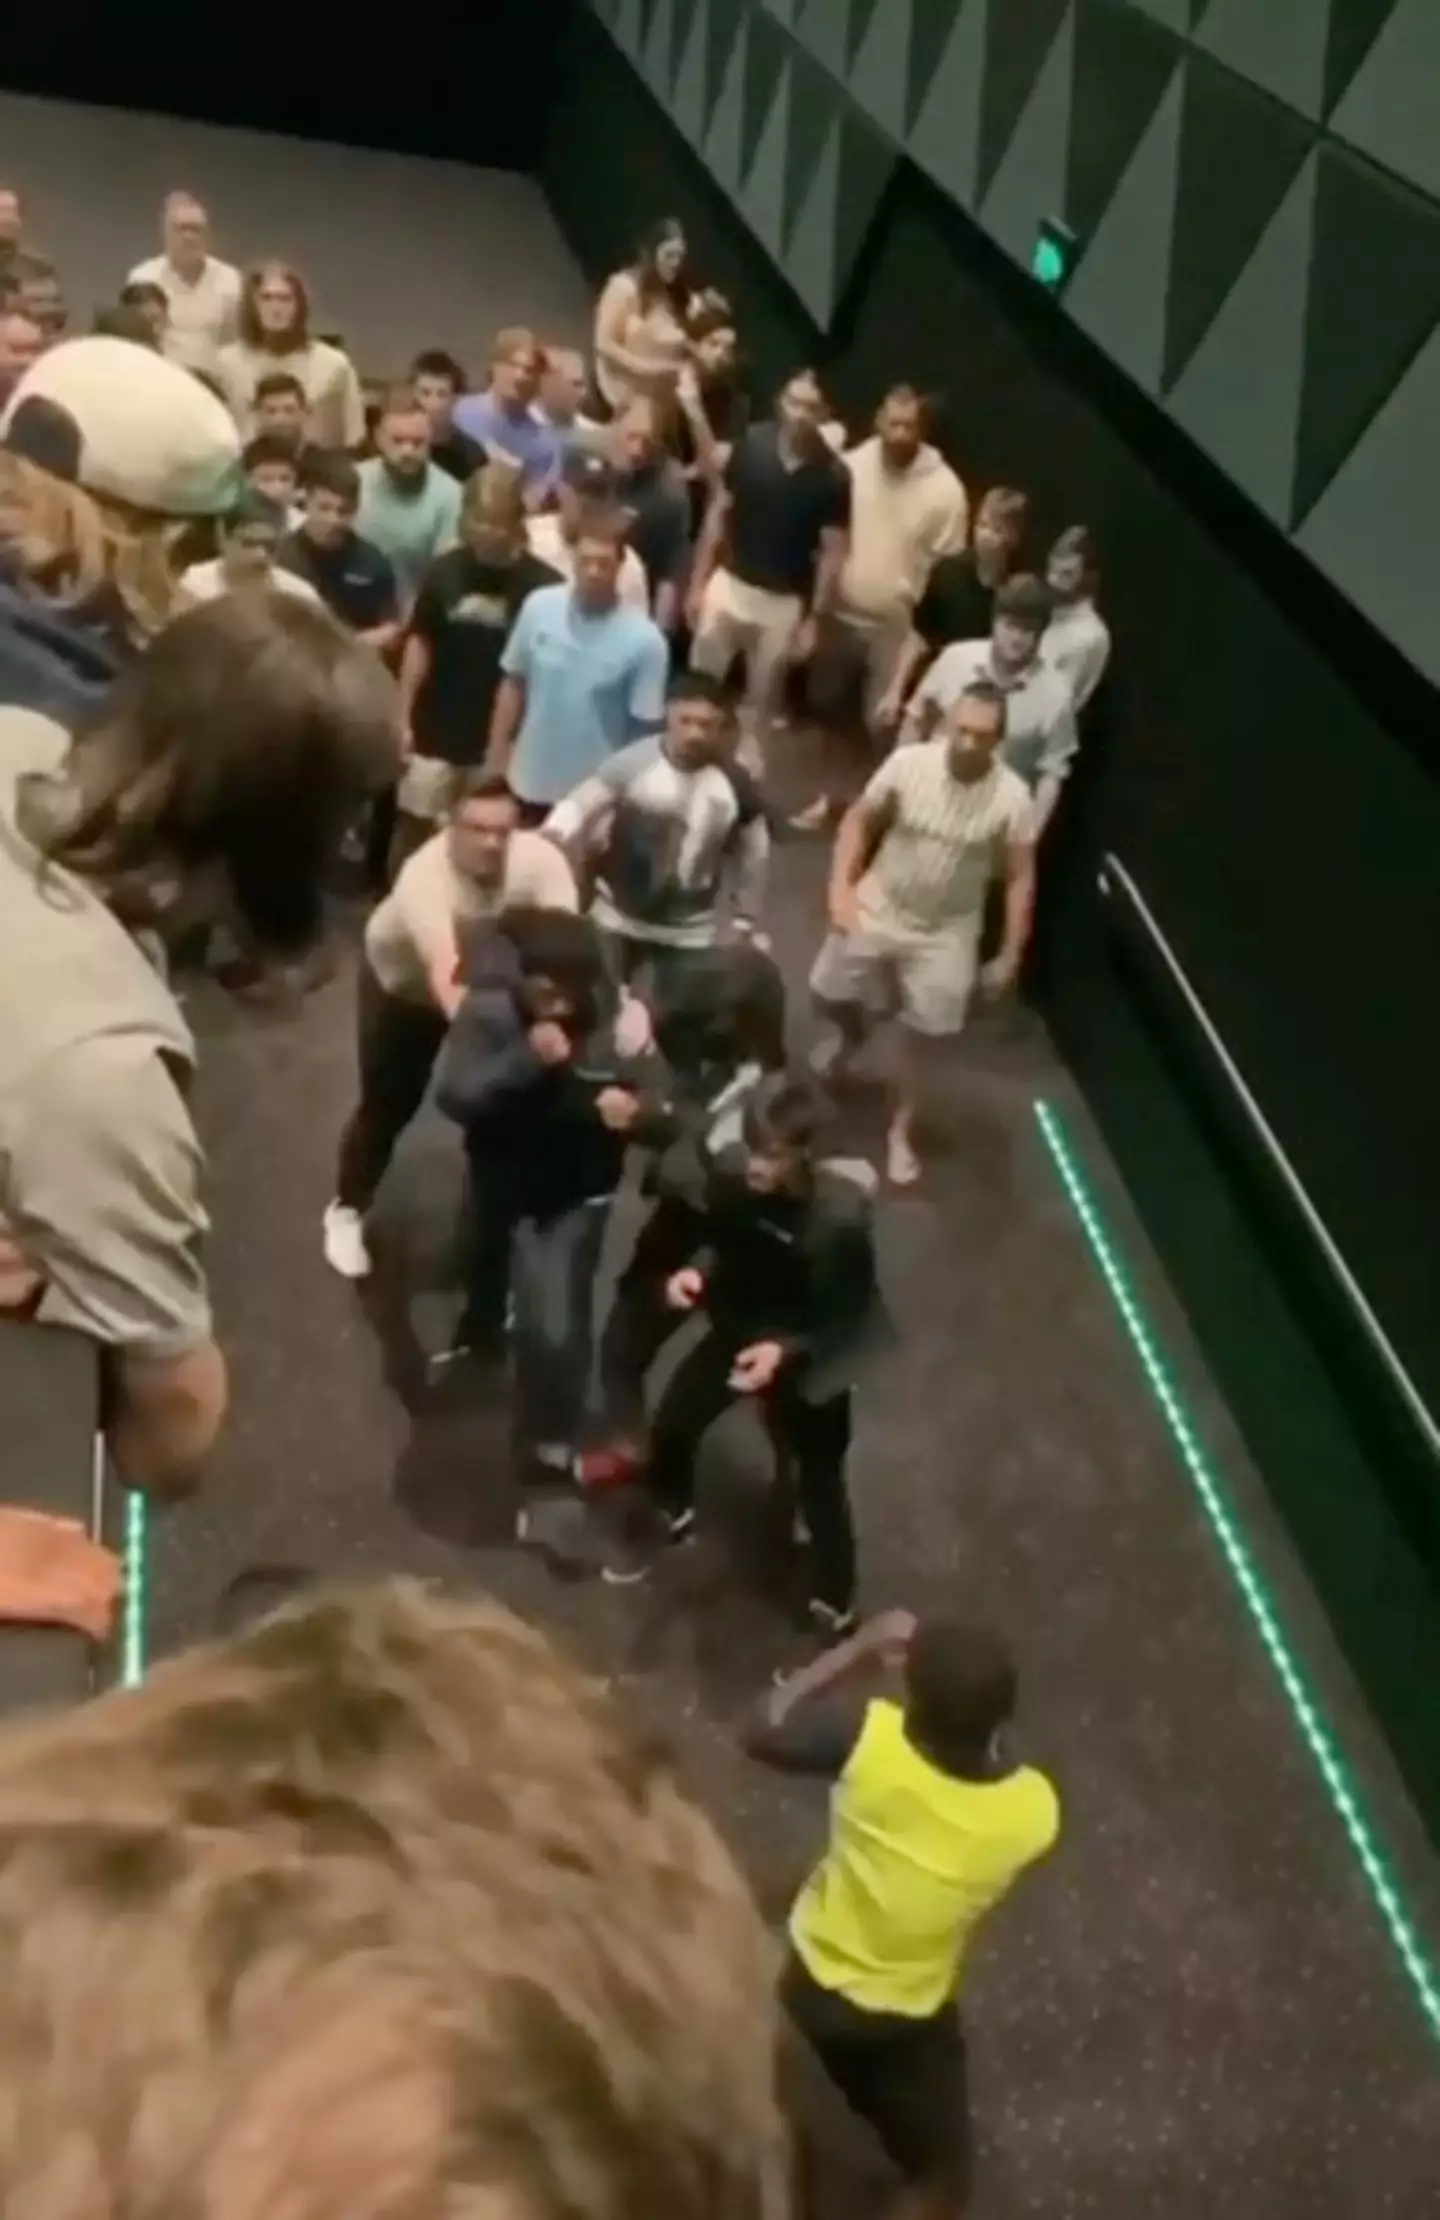 Fight broke out at Spider-Man: No Way Home screening.